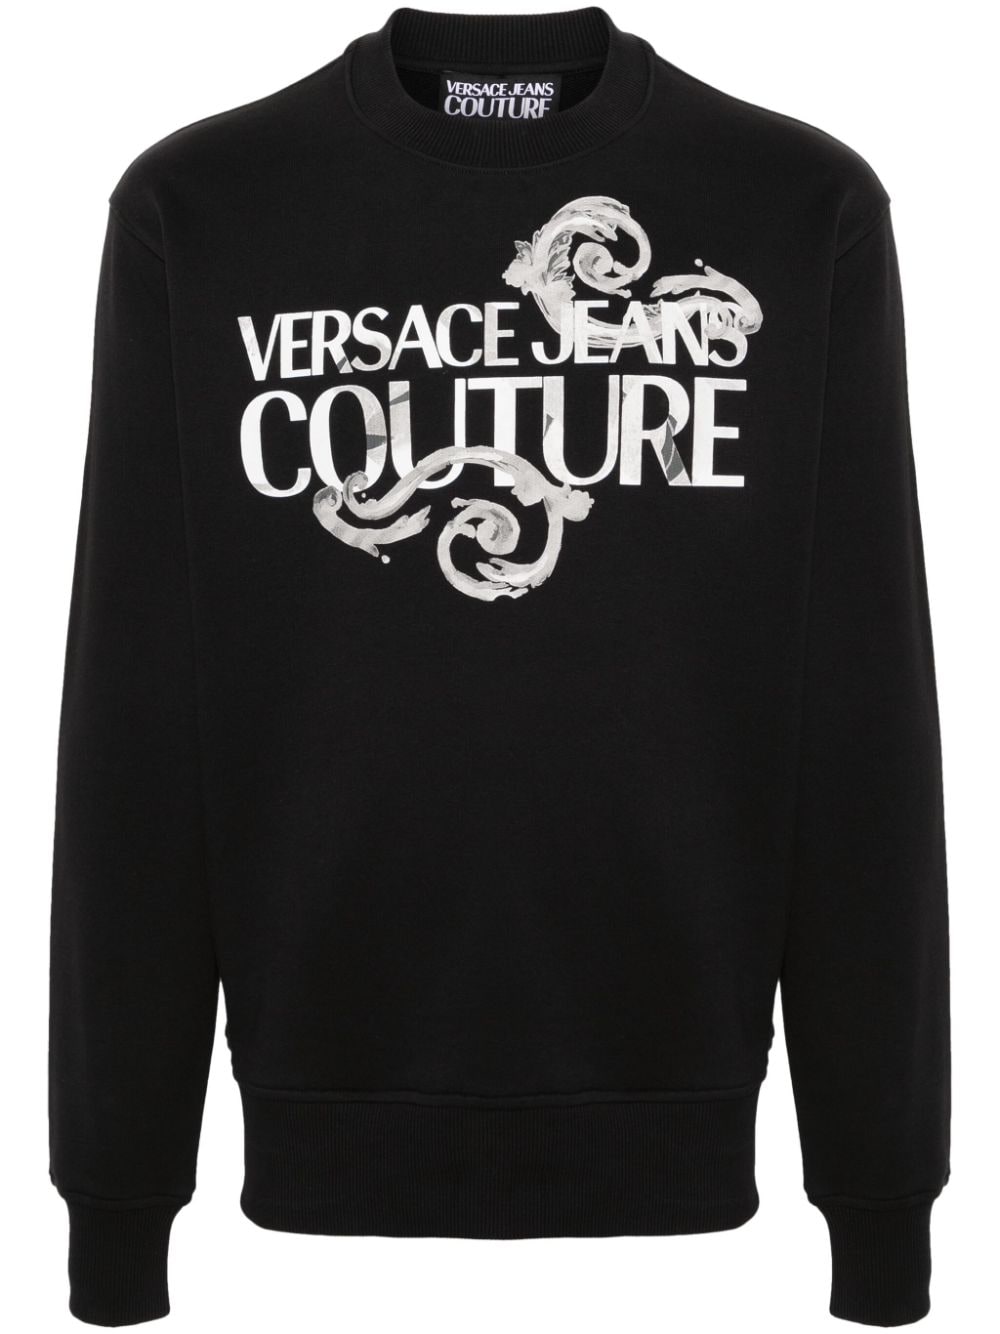 Versace Jeans Couture Watercolour Couture cotton sweatshirt - Black von Versace Jeans Couture